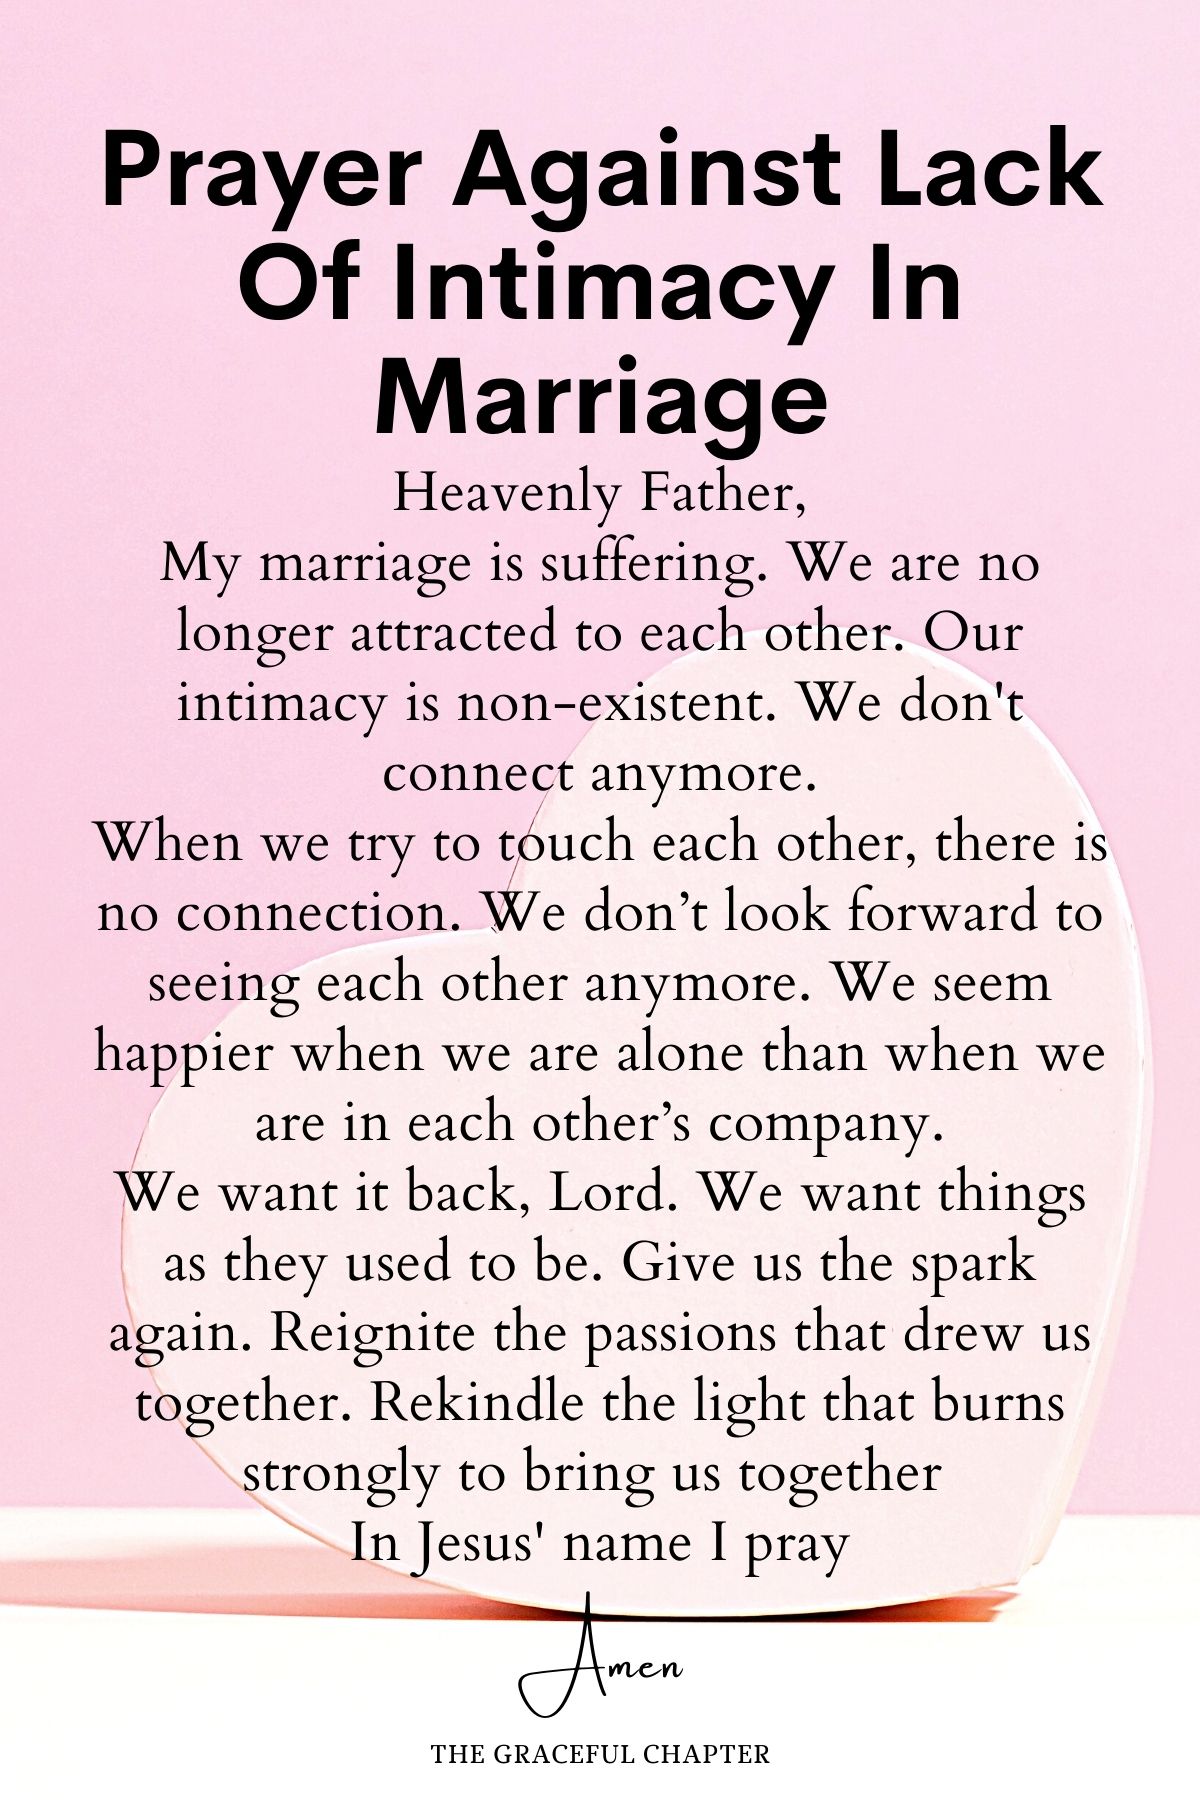 Prayer against lack of intimacy in marriage - prayers for marriage restoration